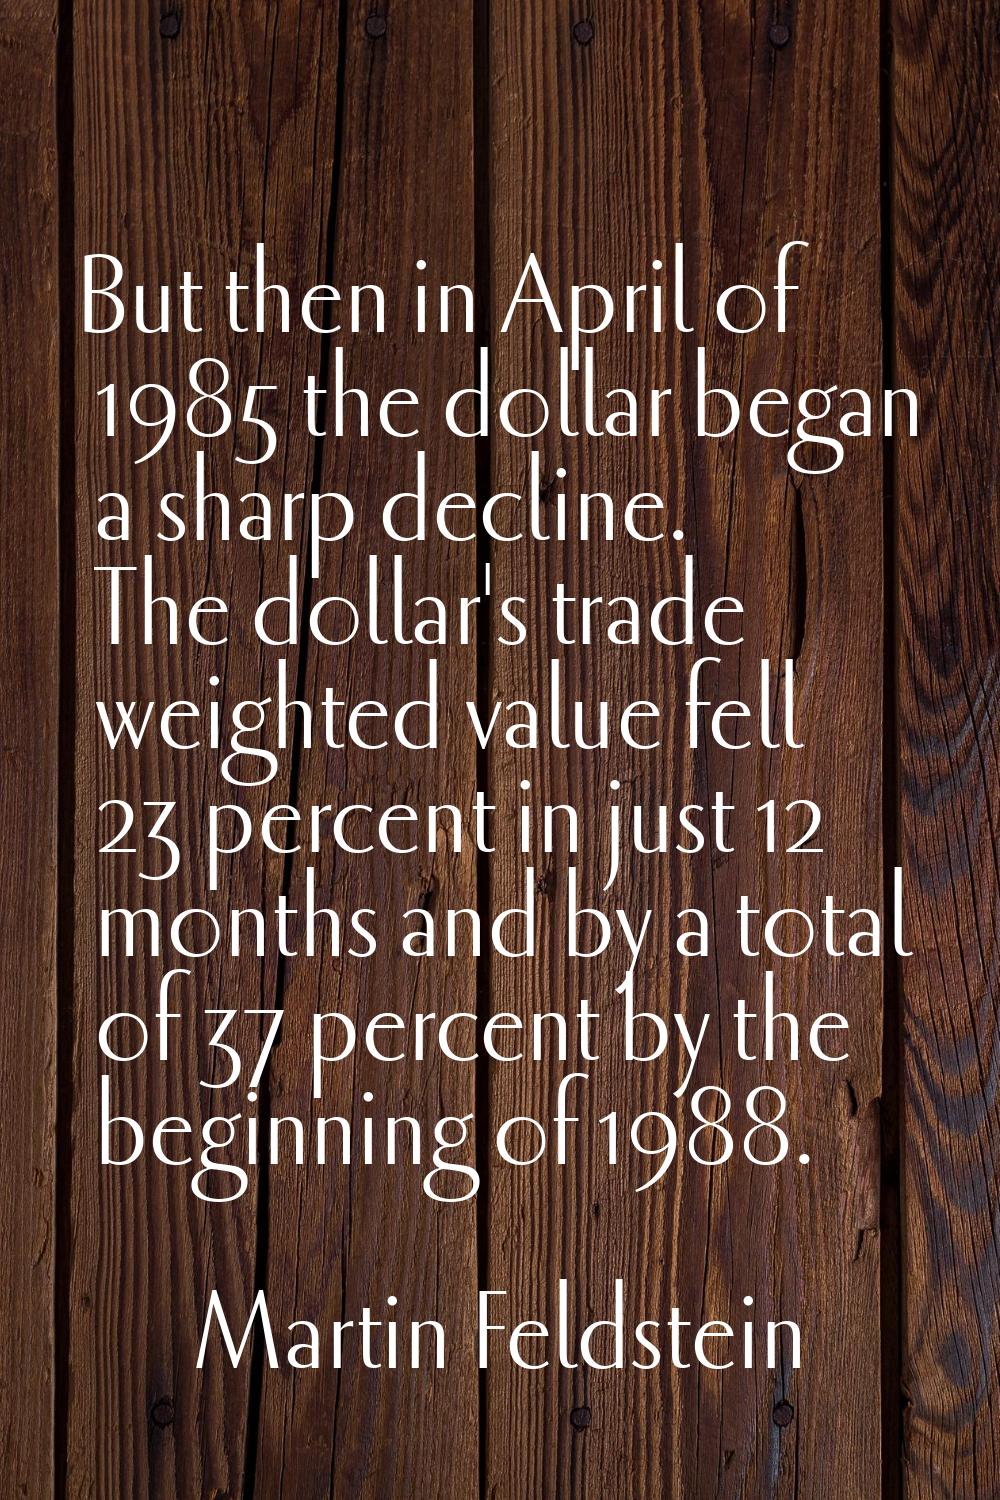 But then in April of 1985 the dollar began a sharp decline. The dollar's trade weighted value fell 